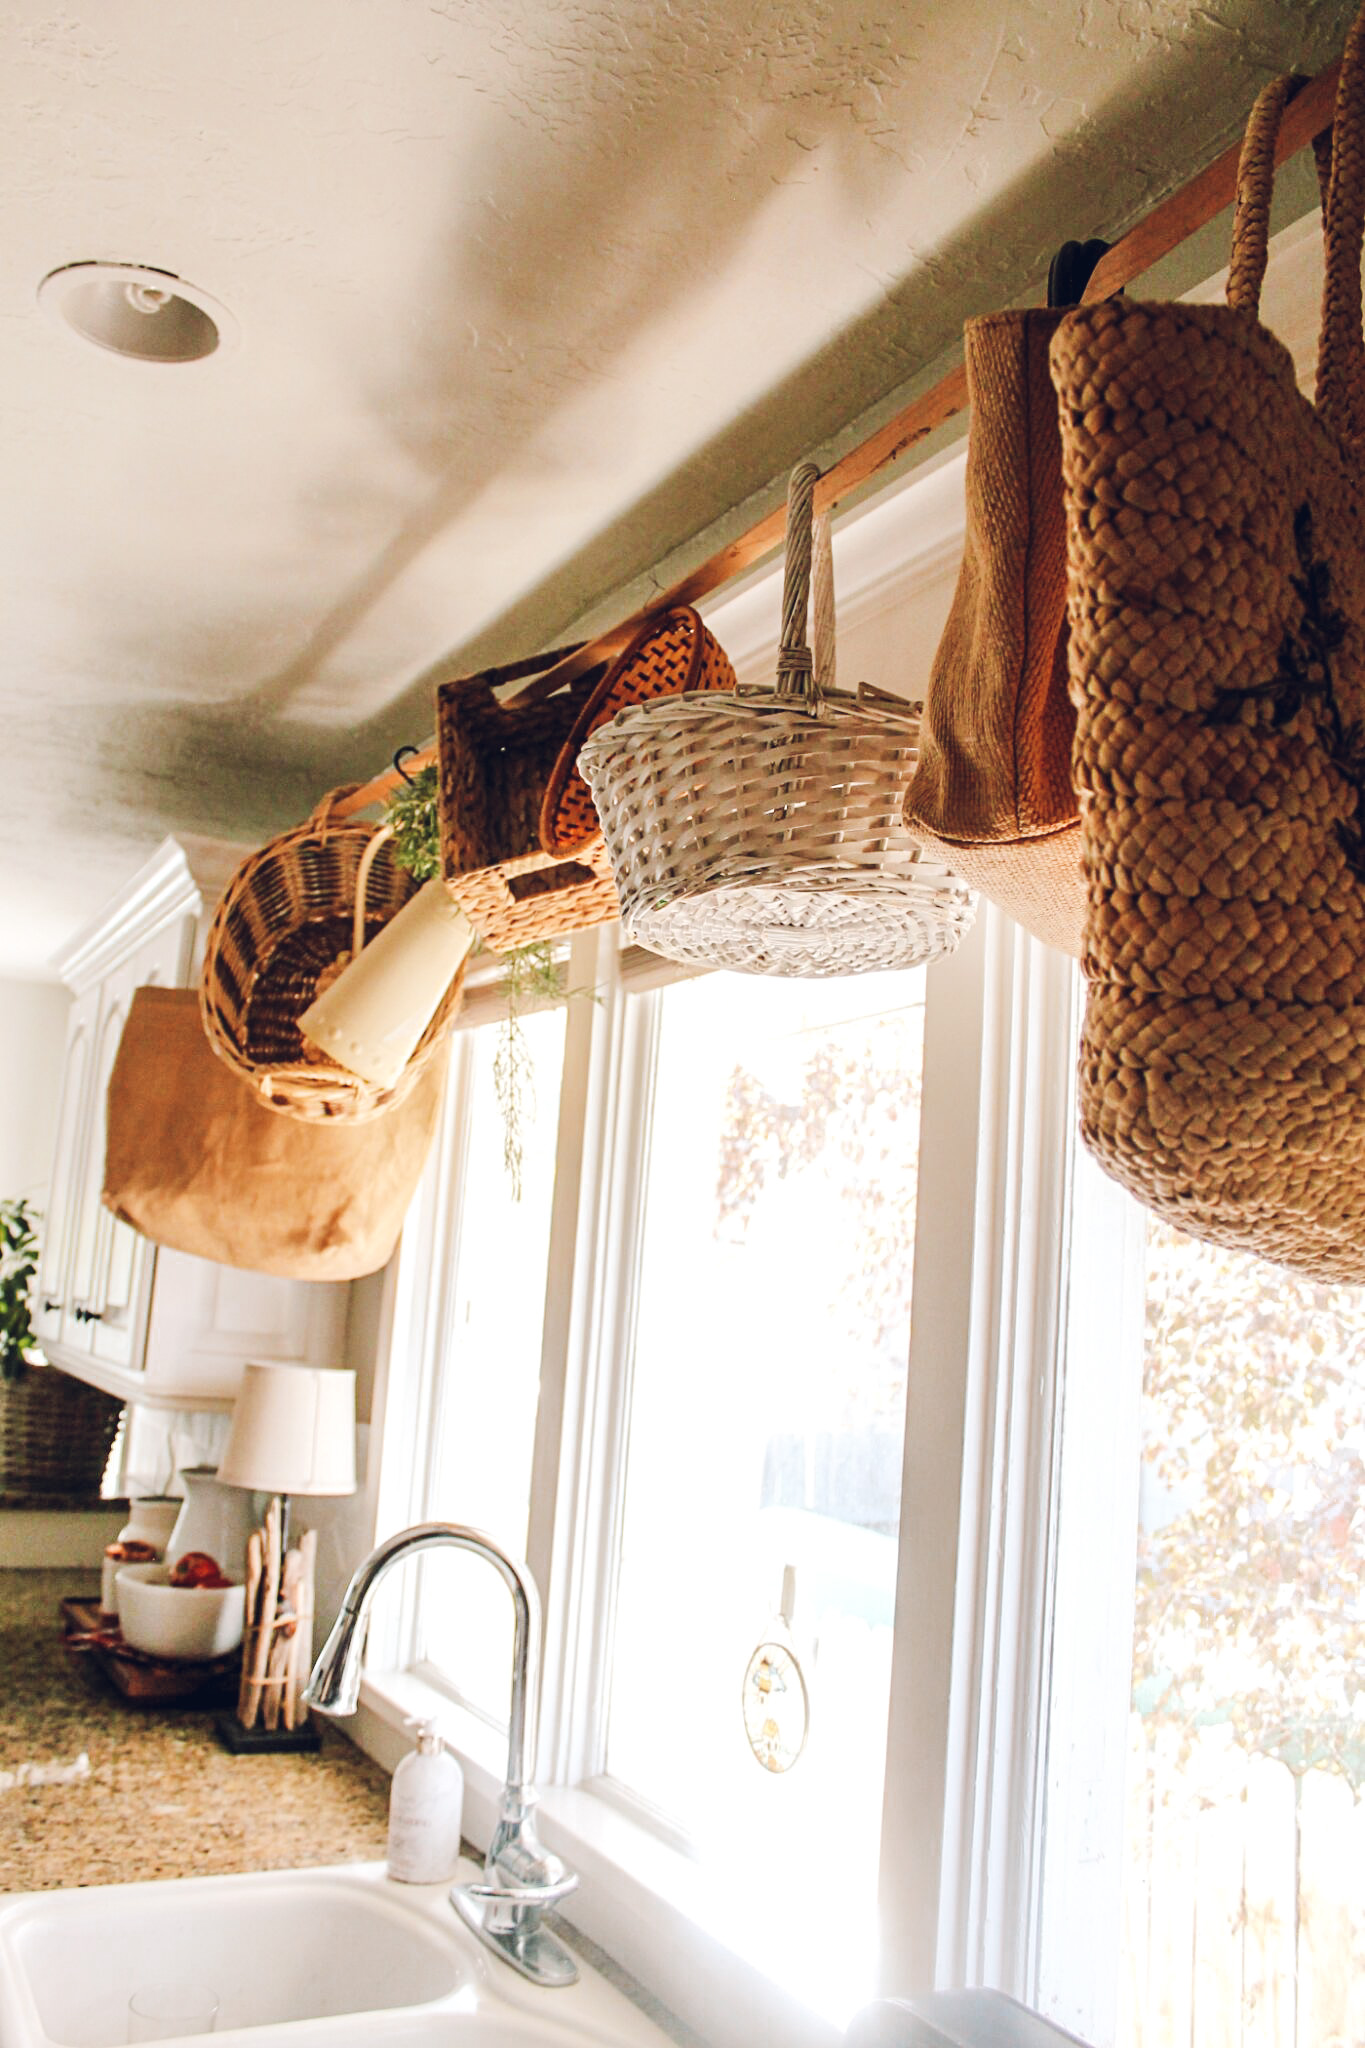 Hanging Baskets in our Kitchen - The Wicker House